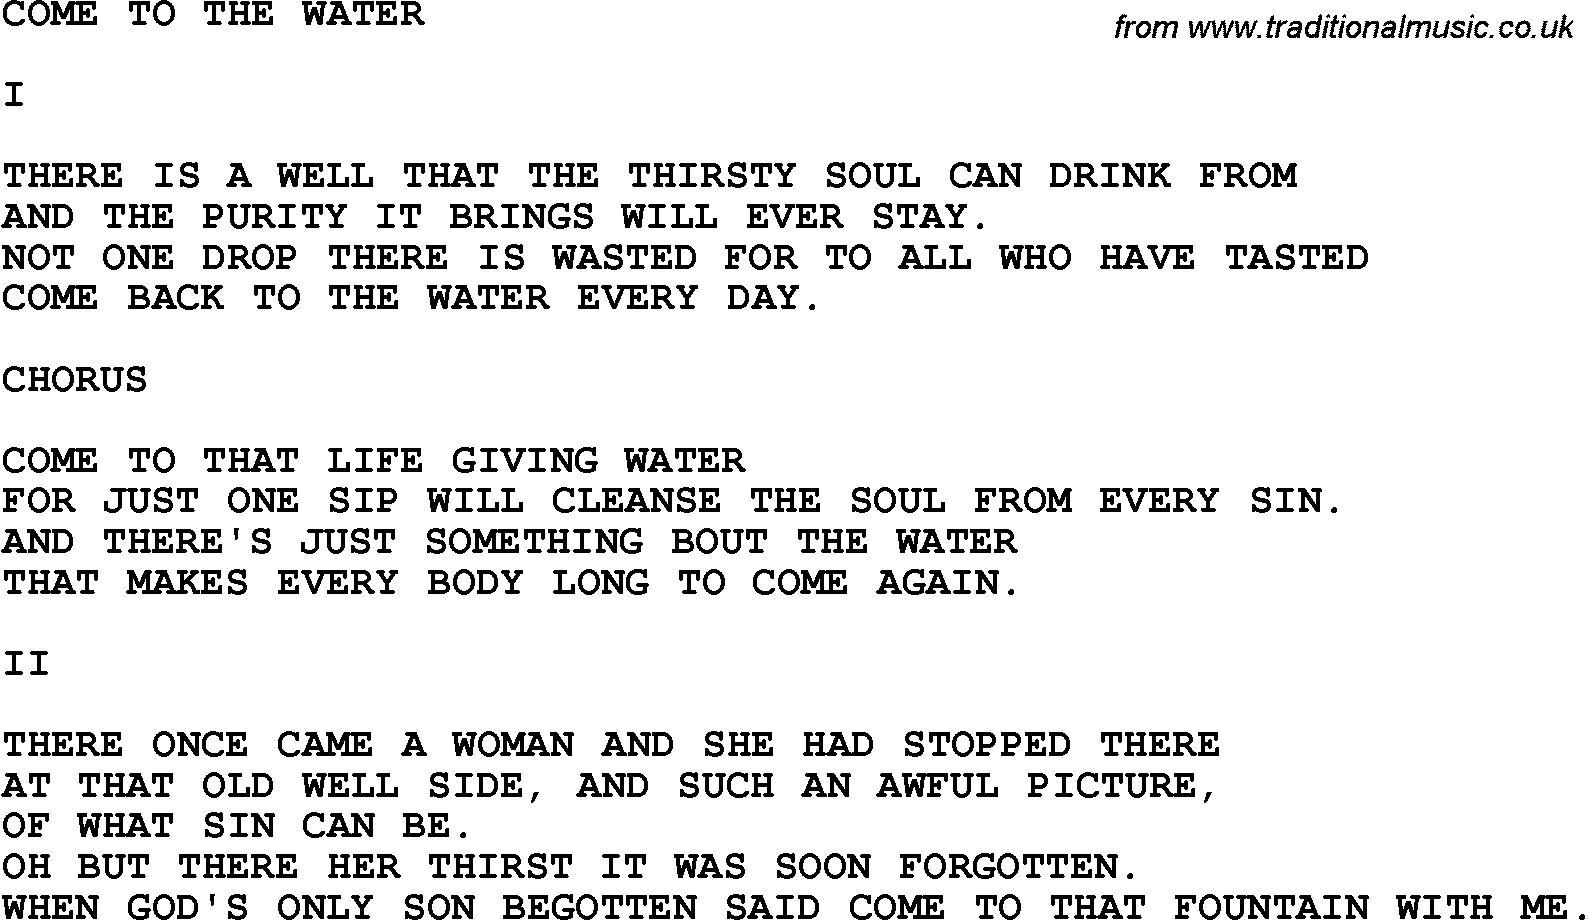 Country, Southern and Bluegrass Gospel Song Come To The Water lyrics 